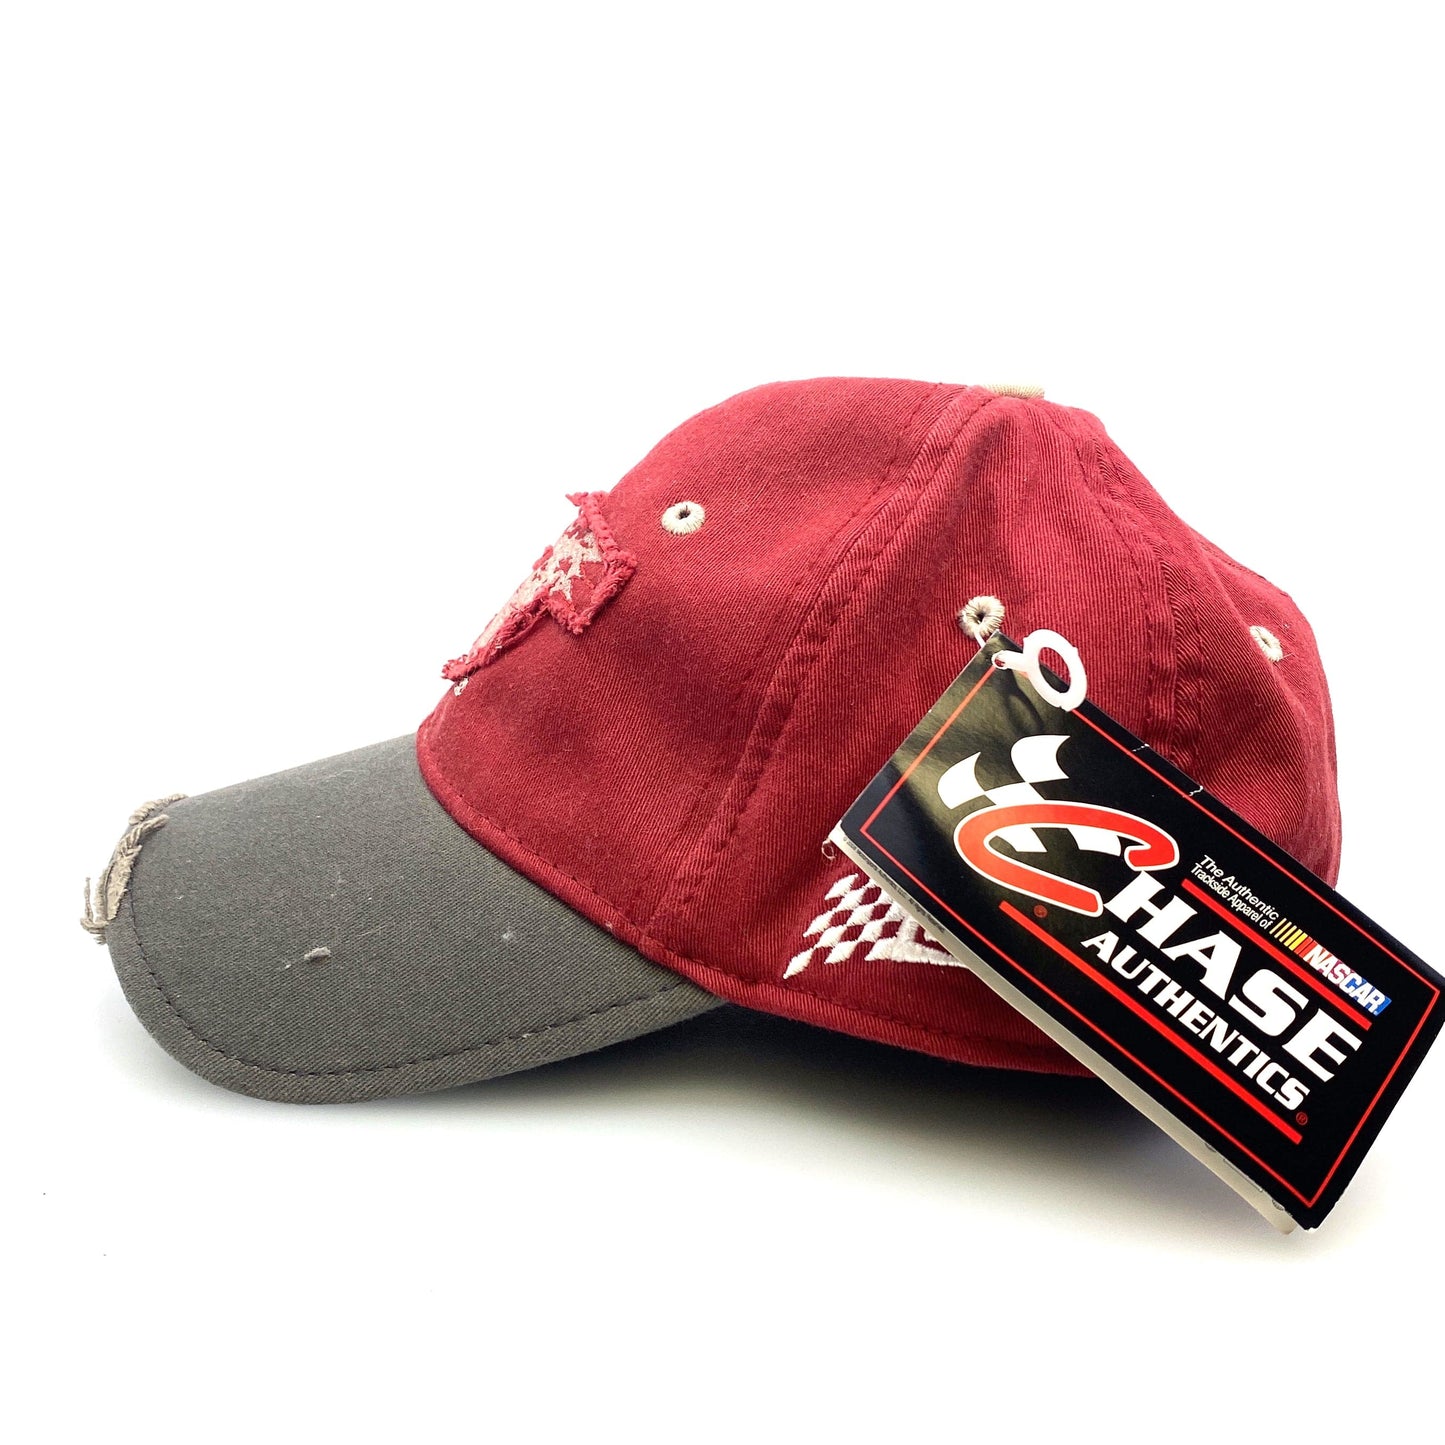 NASCAR Chase Authentics Mens #9 Kasey Kahne Racing Hat, Red Gray OS Flex